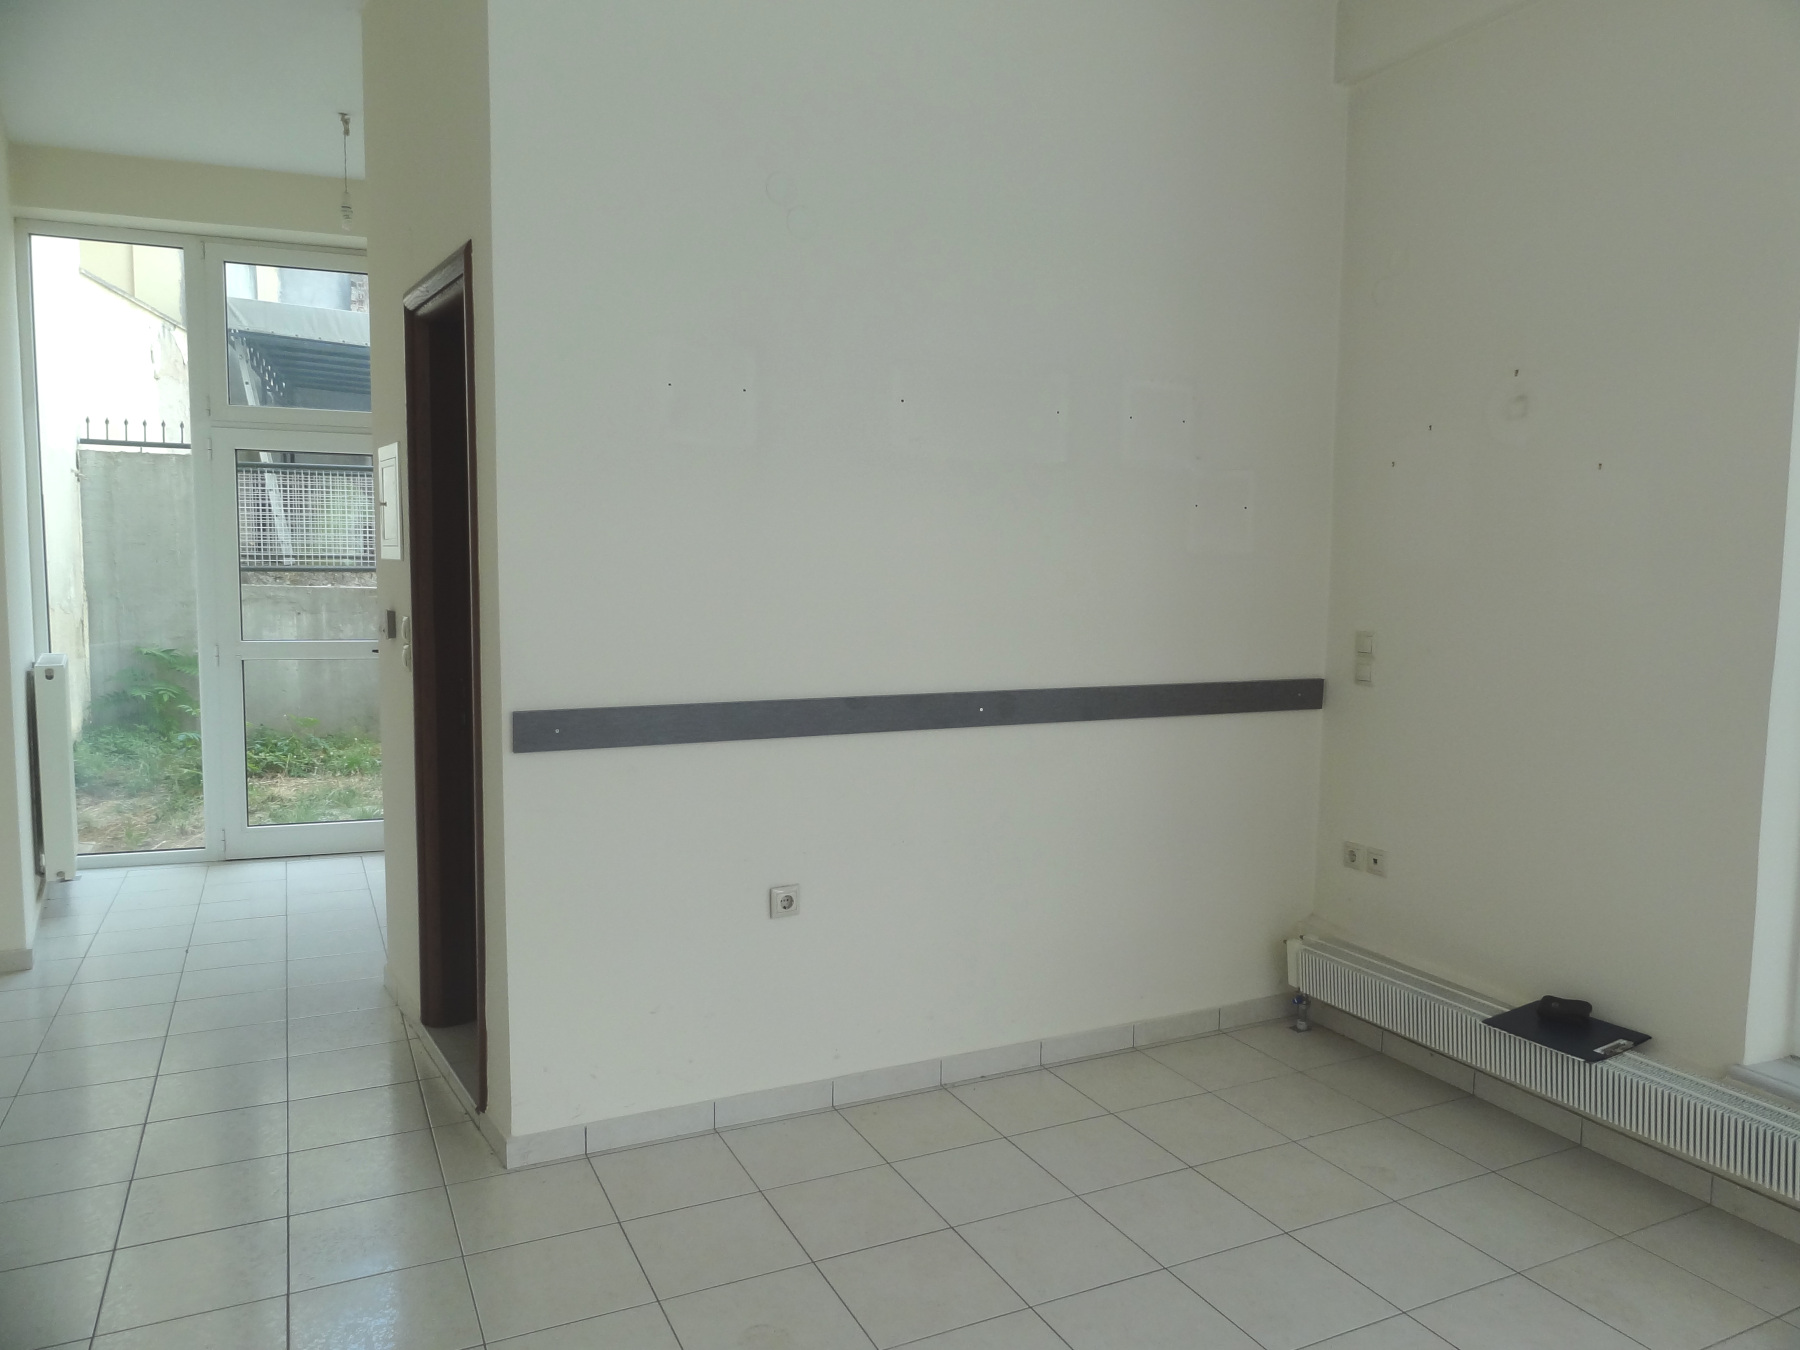 For rent ground floor commercial space of 26 sq.m. built in 2009 in the area of the Nursing Home in Ioannina